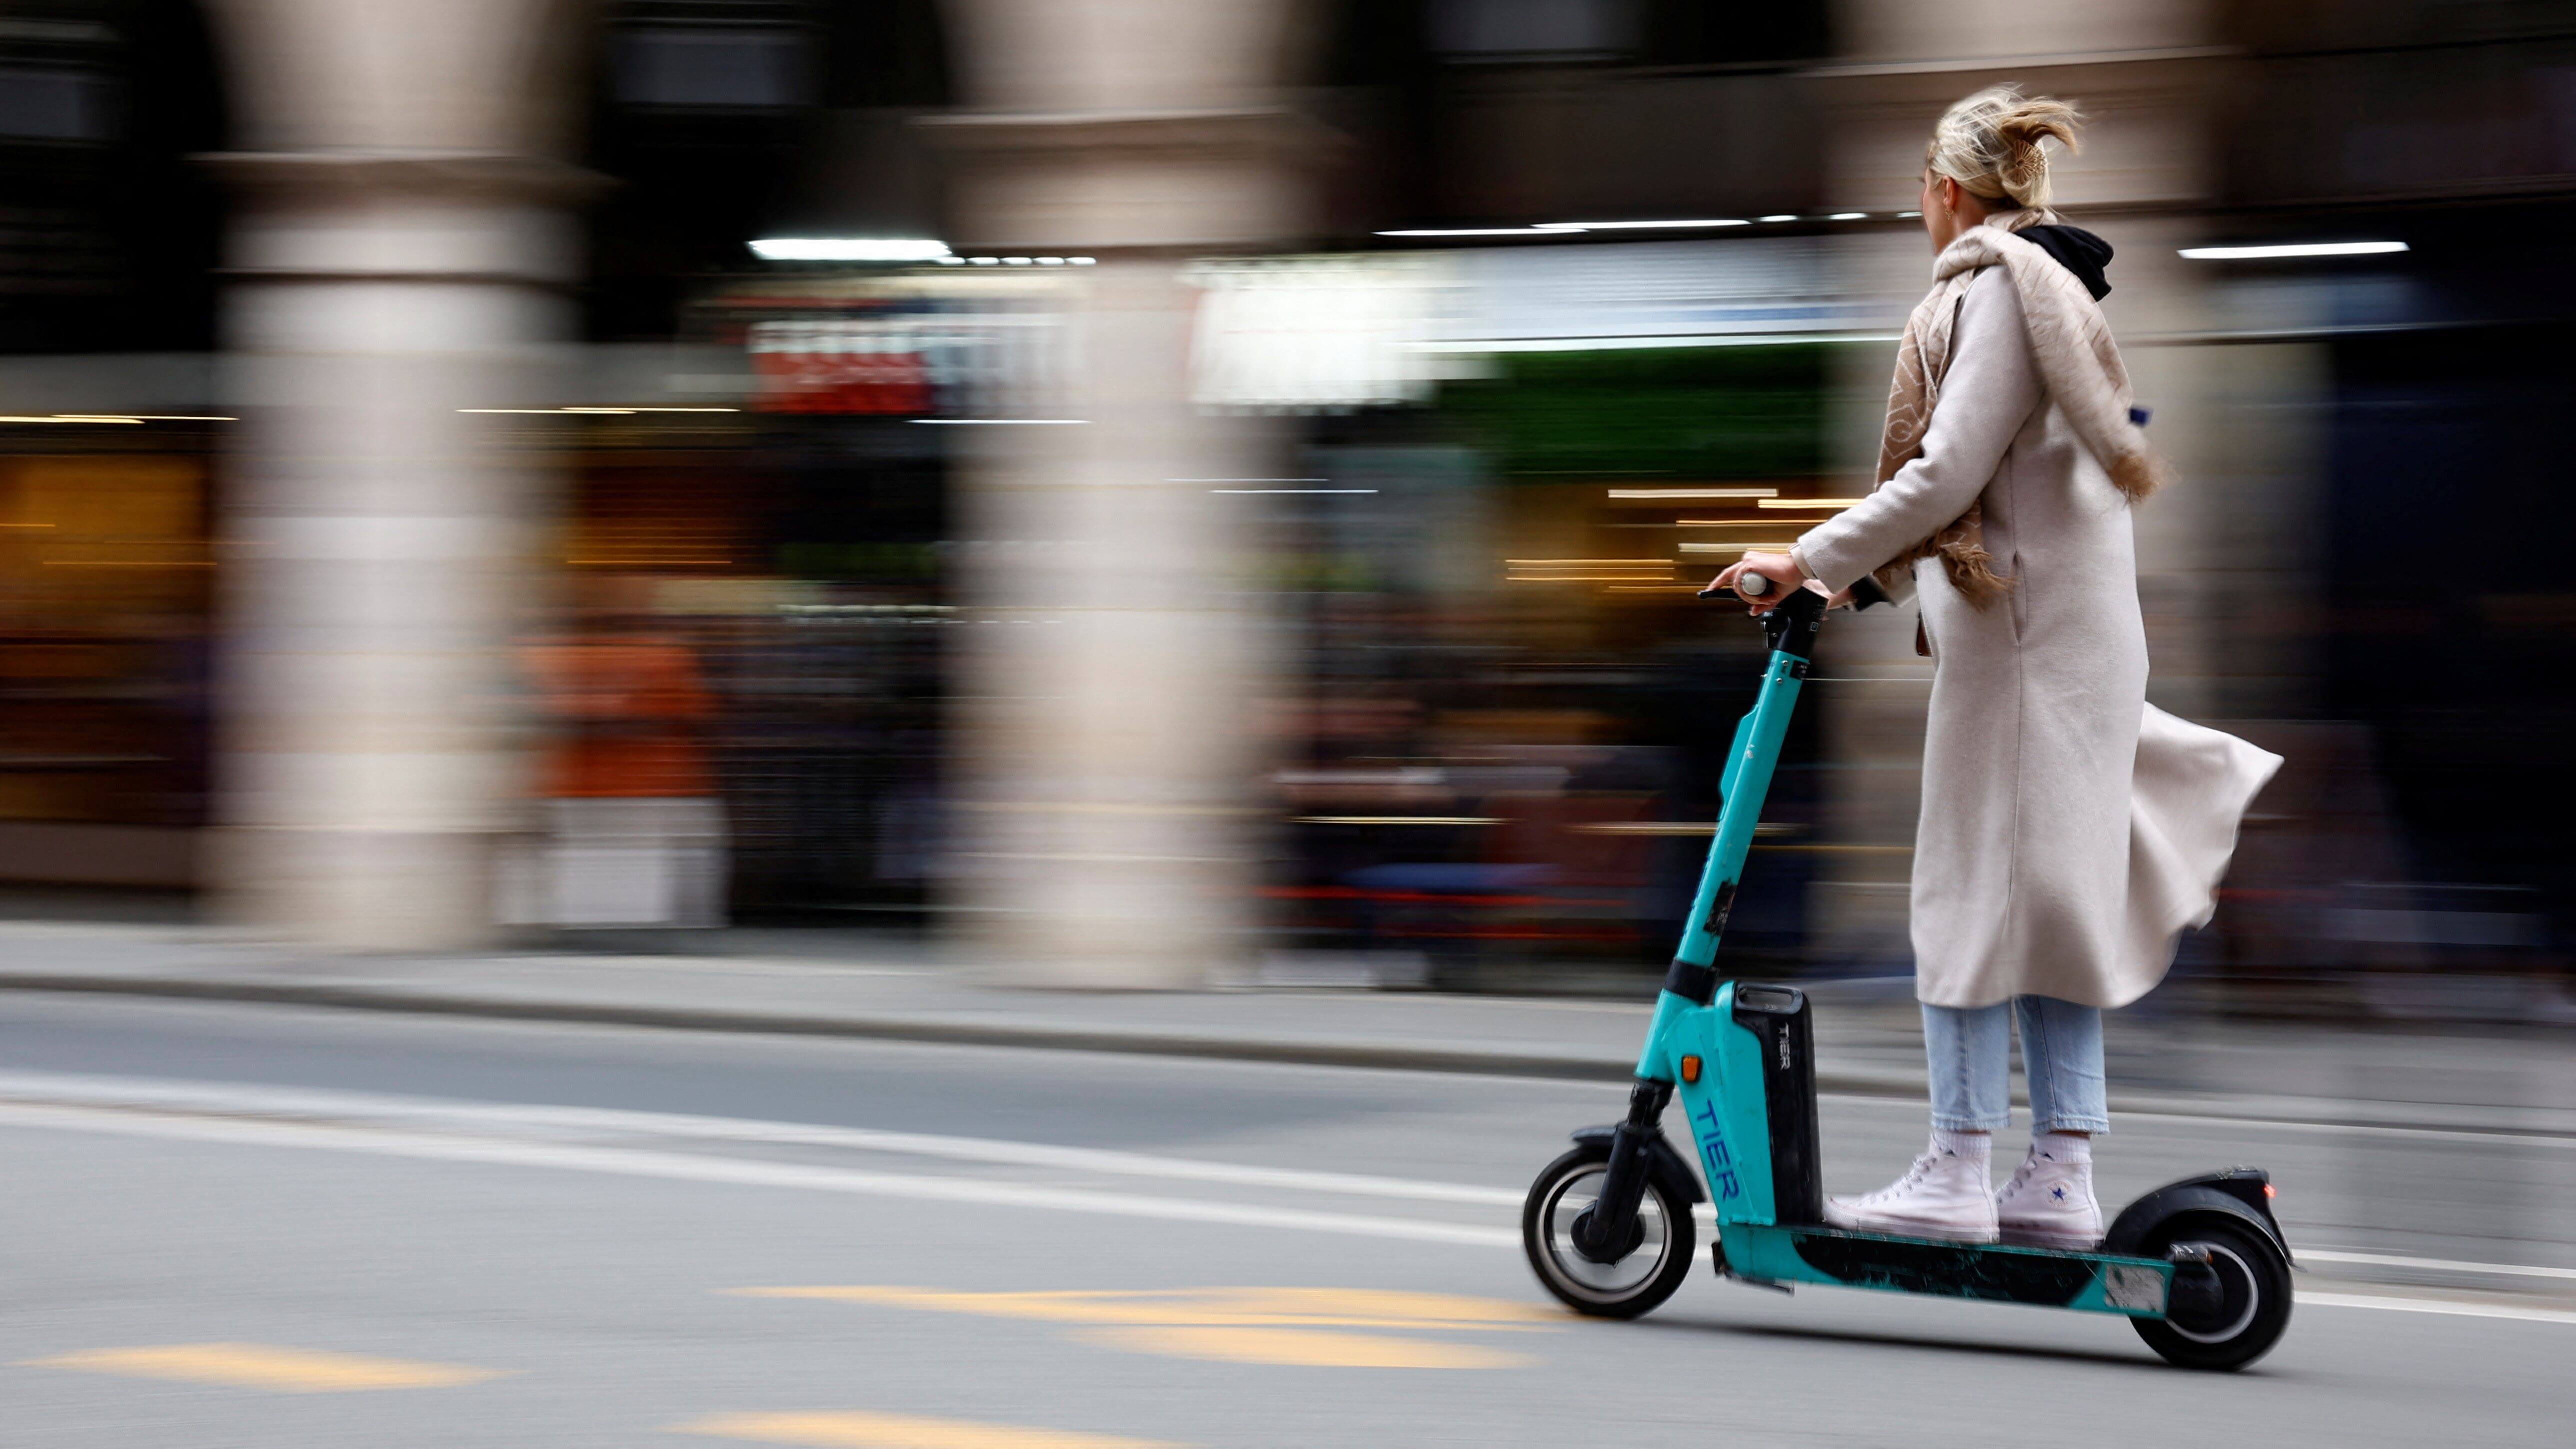 Parisians Vote To Ban E-Scooters From French Capital